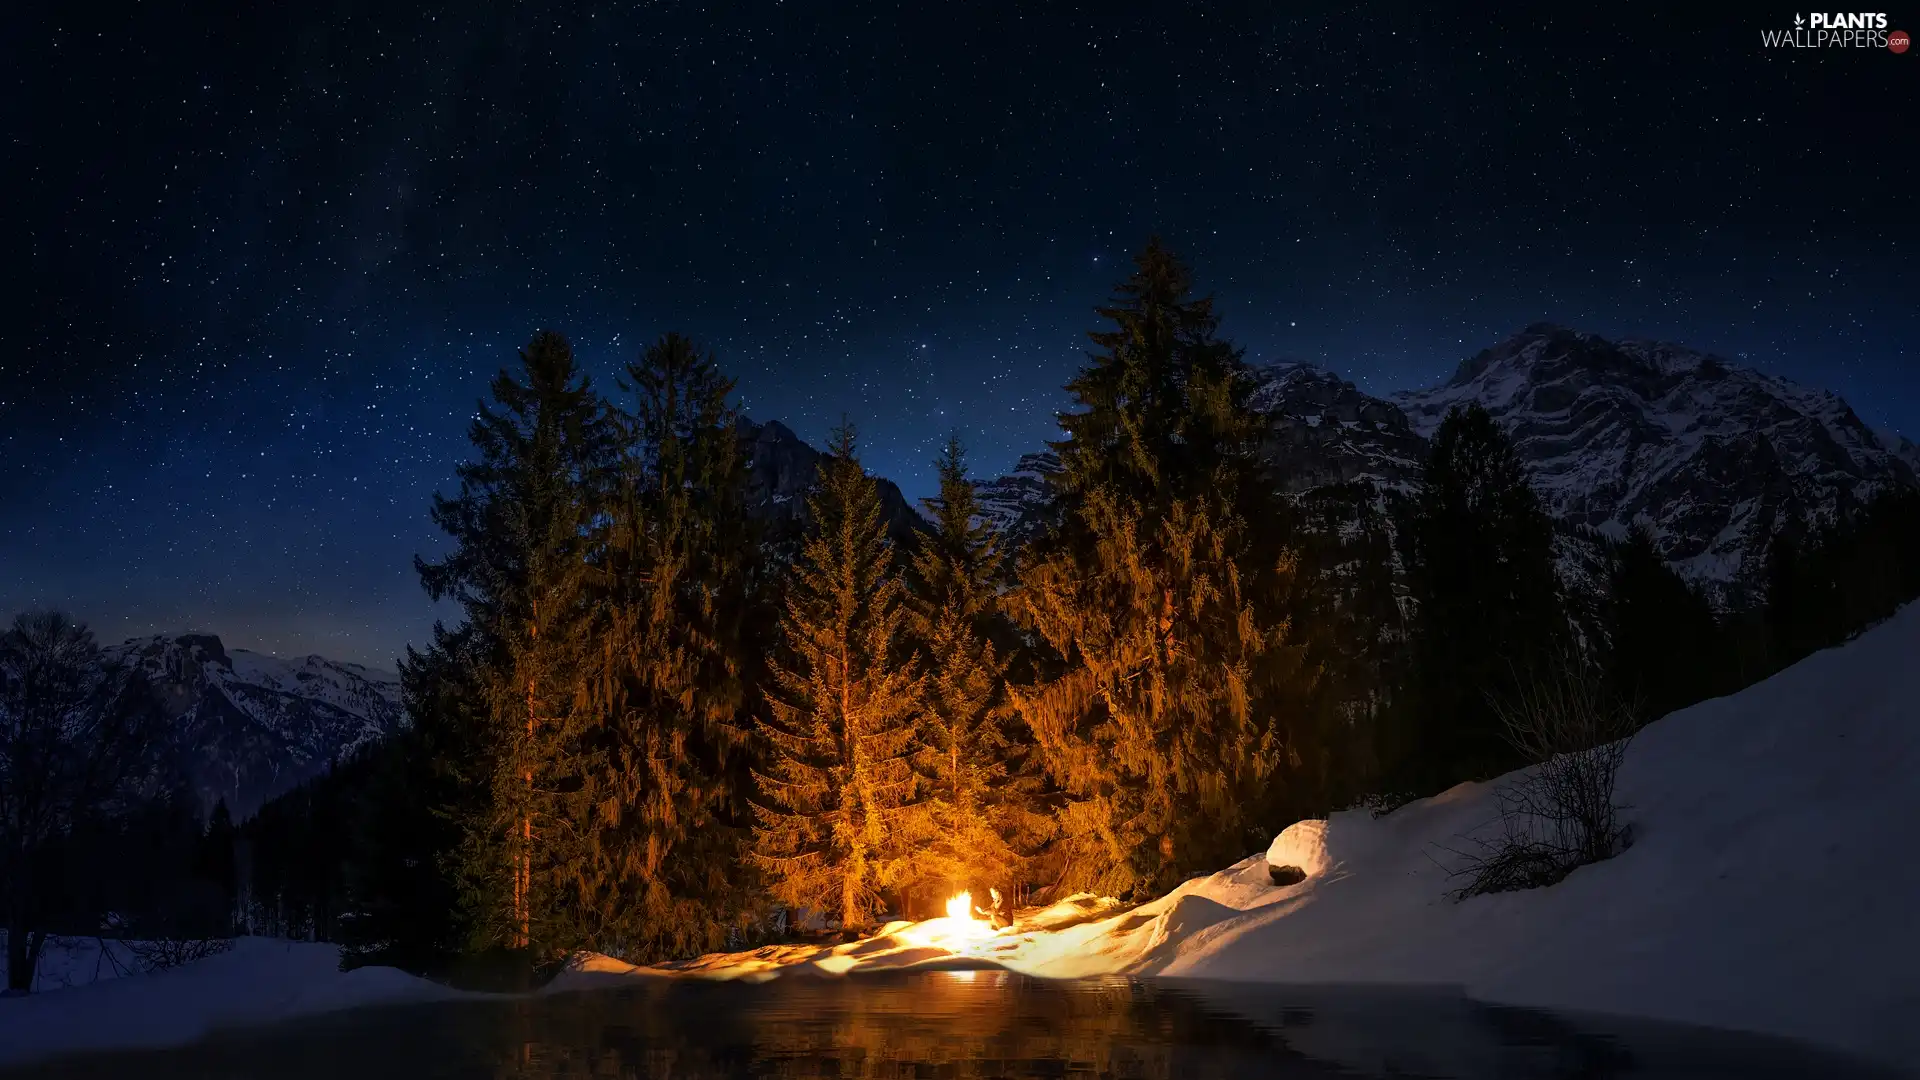 River, winter, viewes, fire, trees, Night